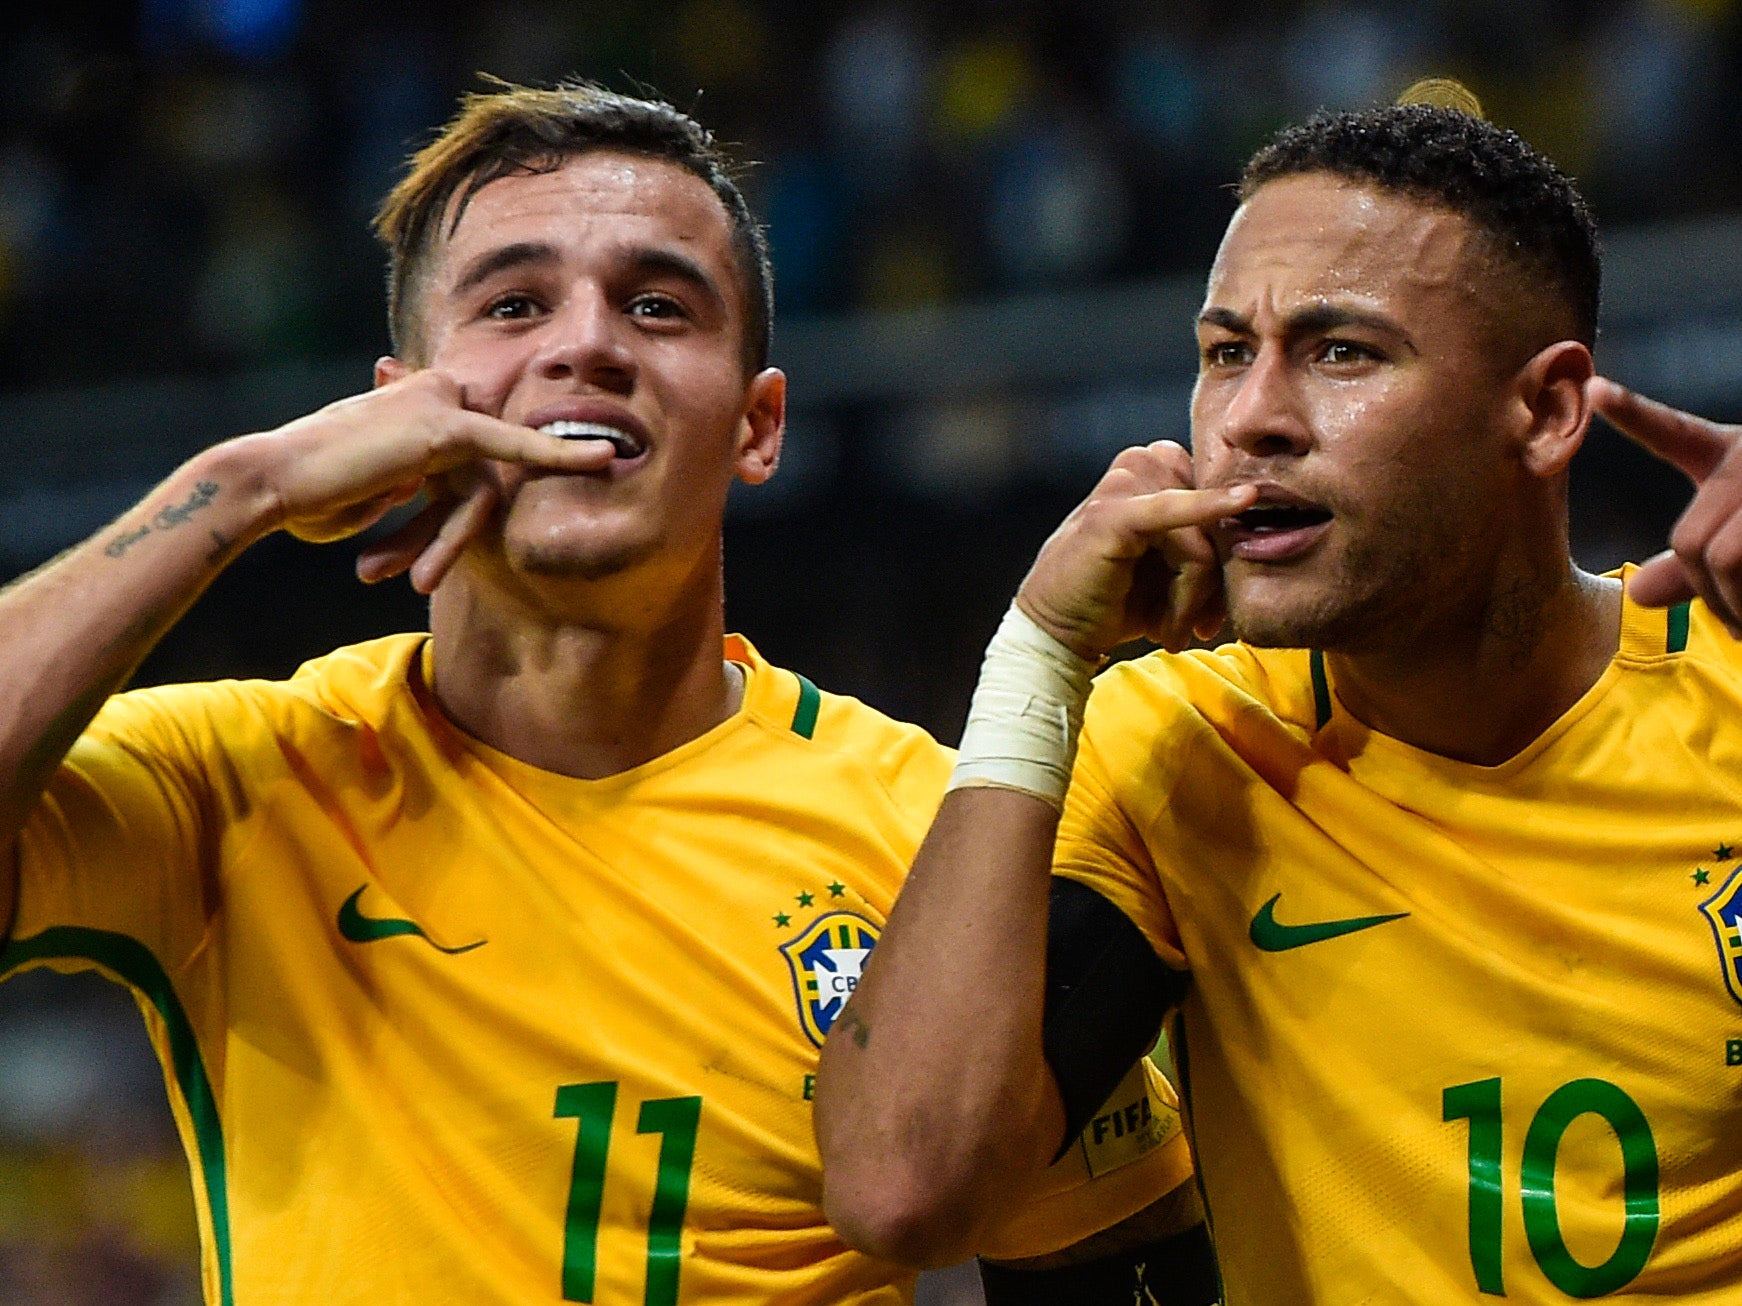 Coutinho and Neymar are close friends on and off the field with Brazil